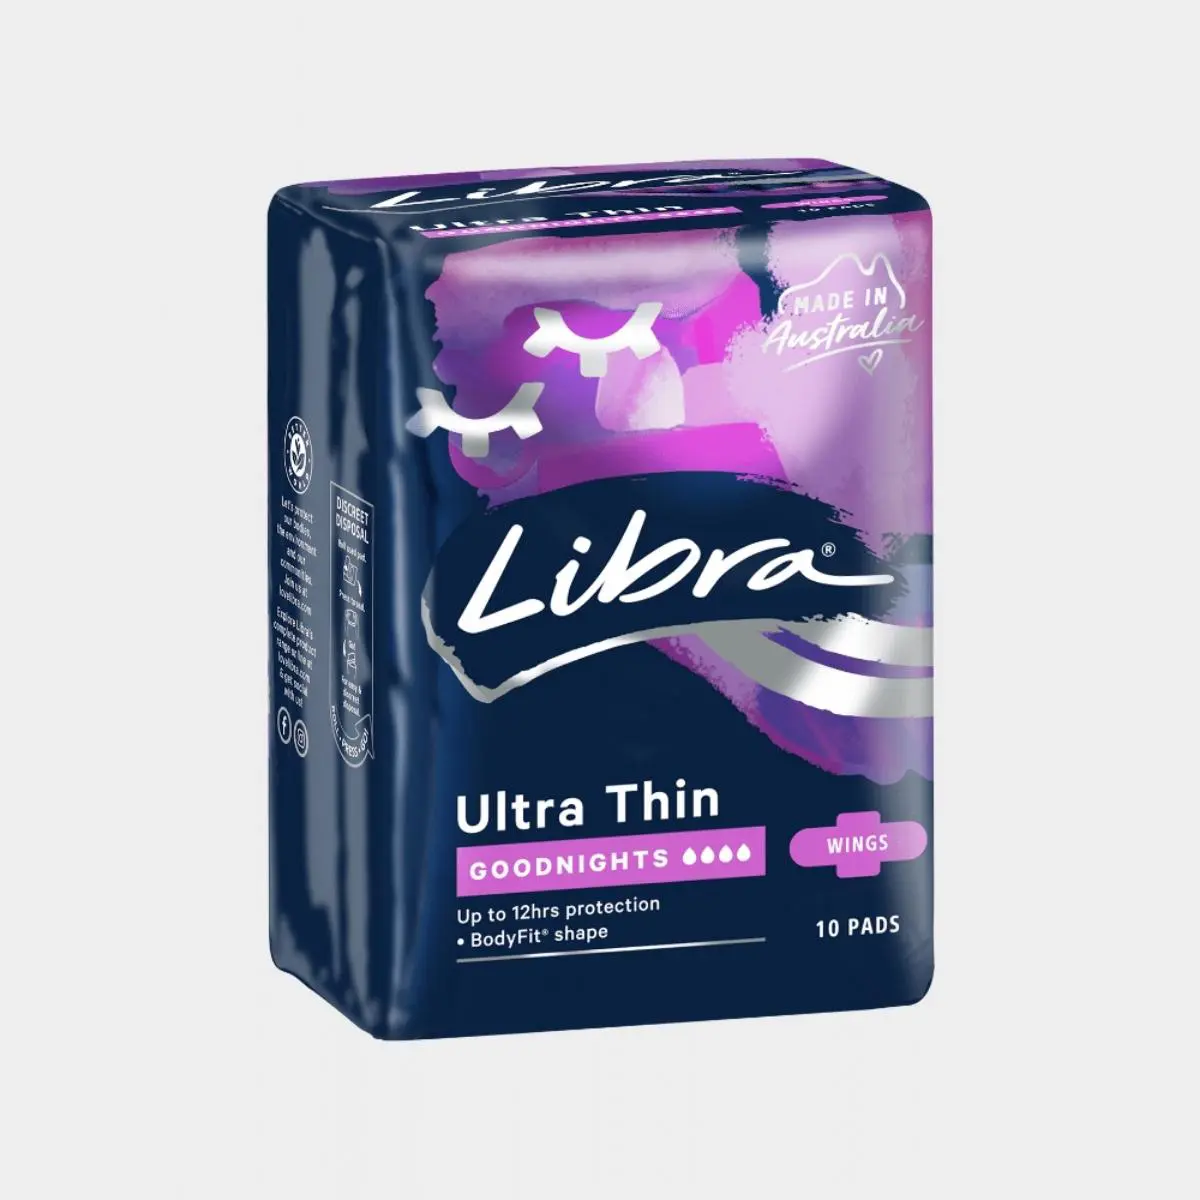 Ultra Thin Goodnights Pads with Wings